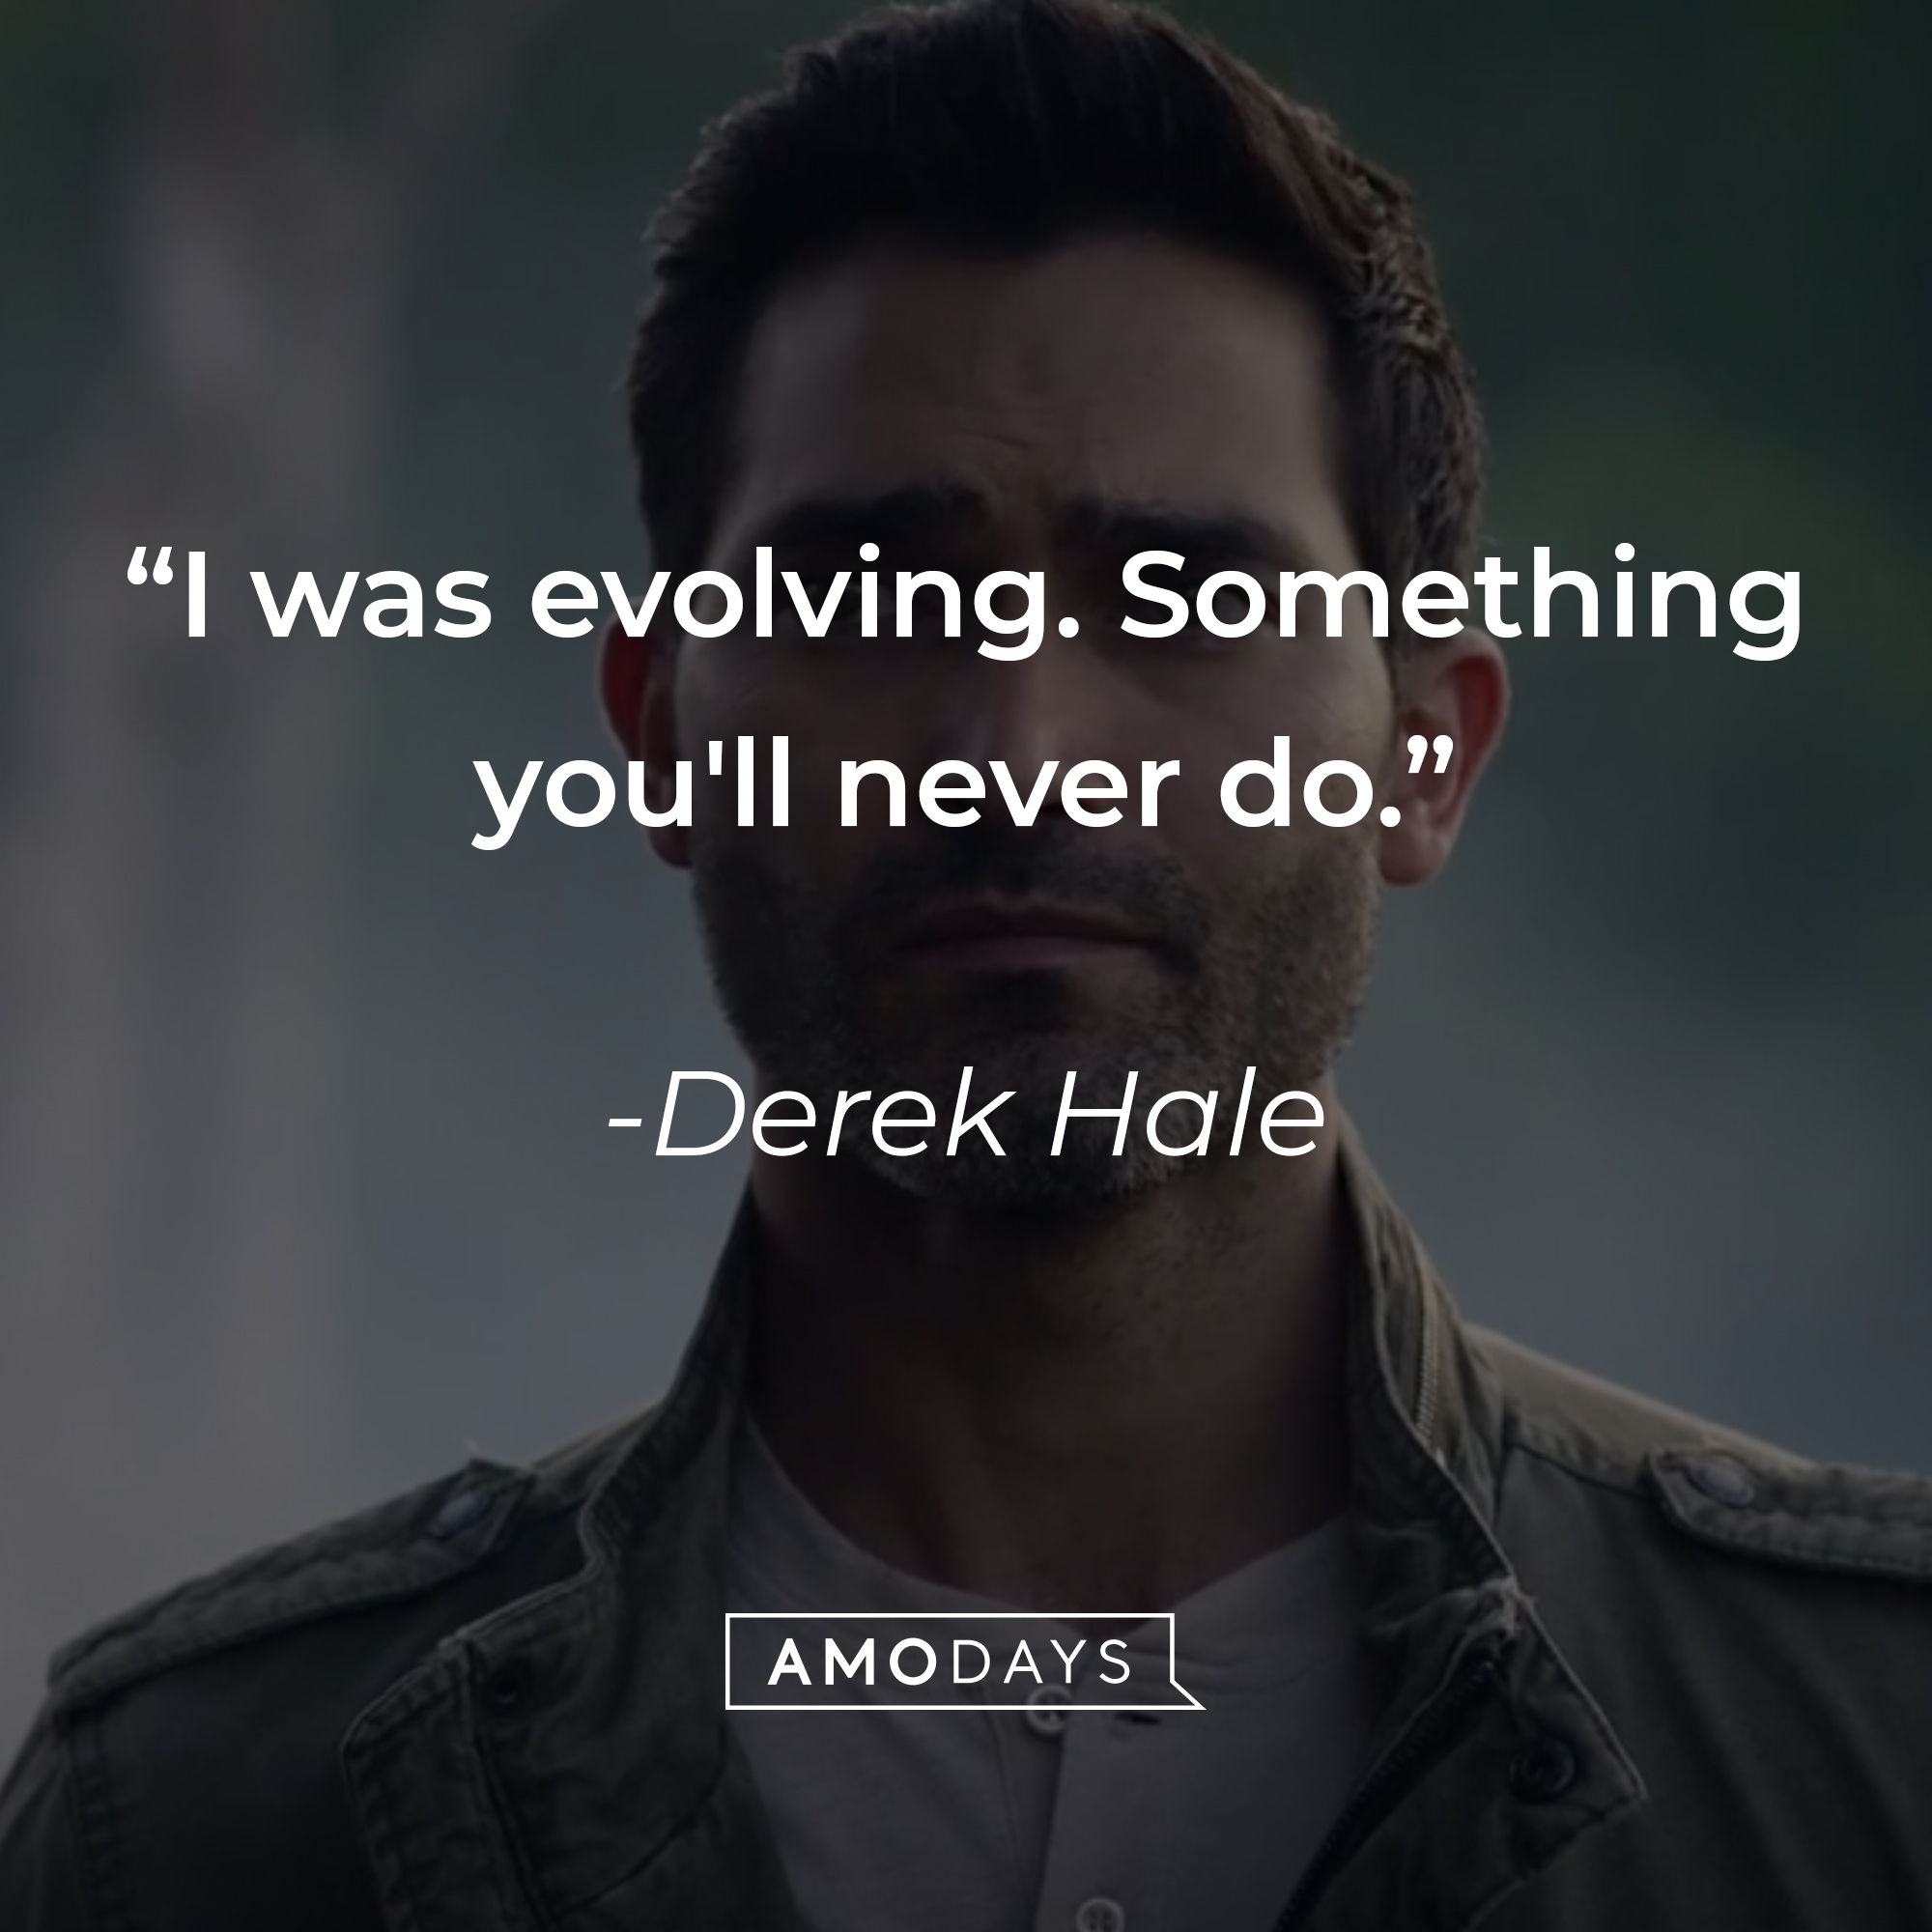 Derek Hale, with his quote: "I was evolving. Something you'll never do." | Source: Amodays